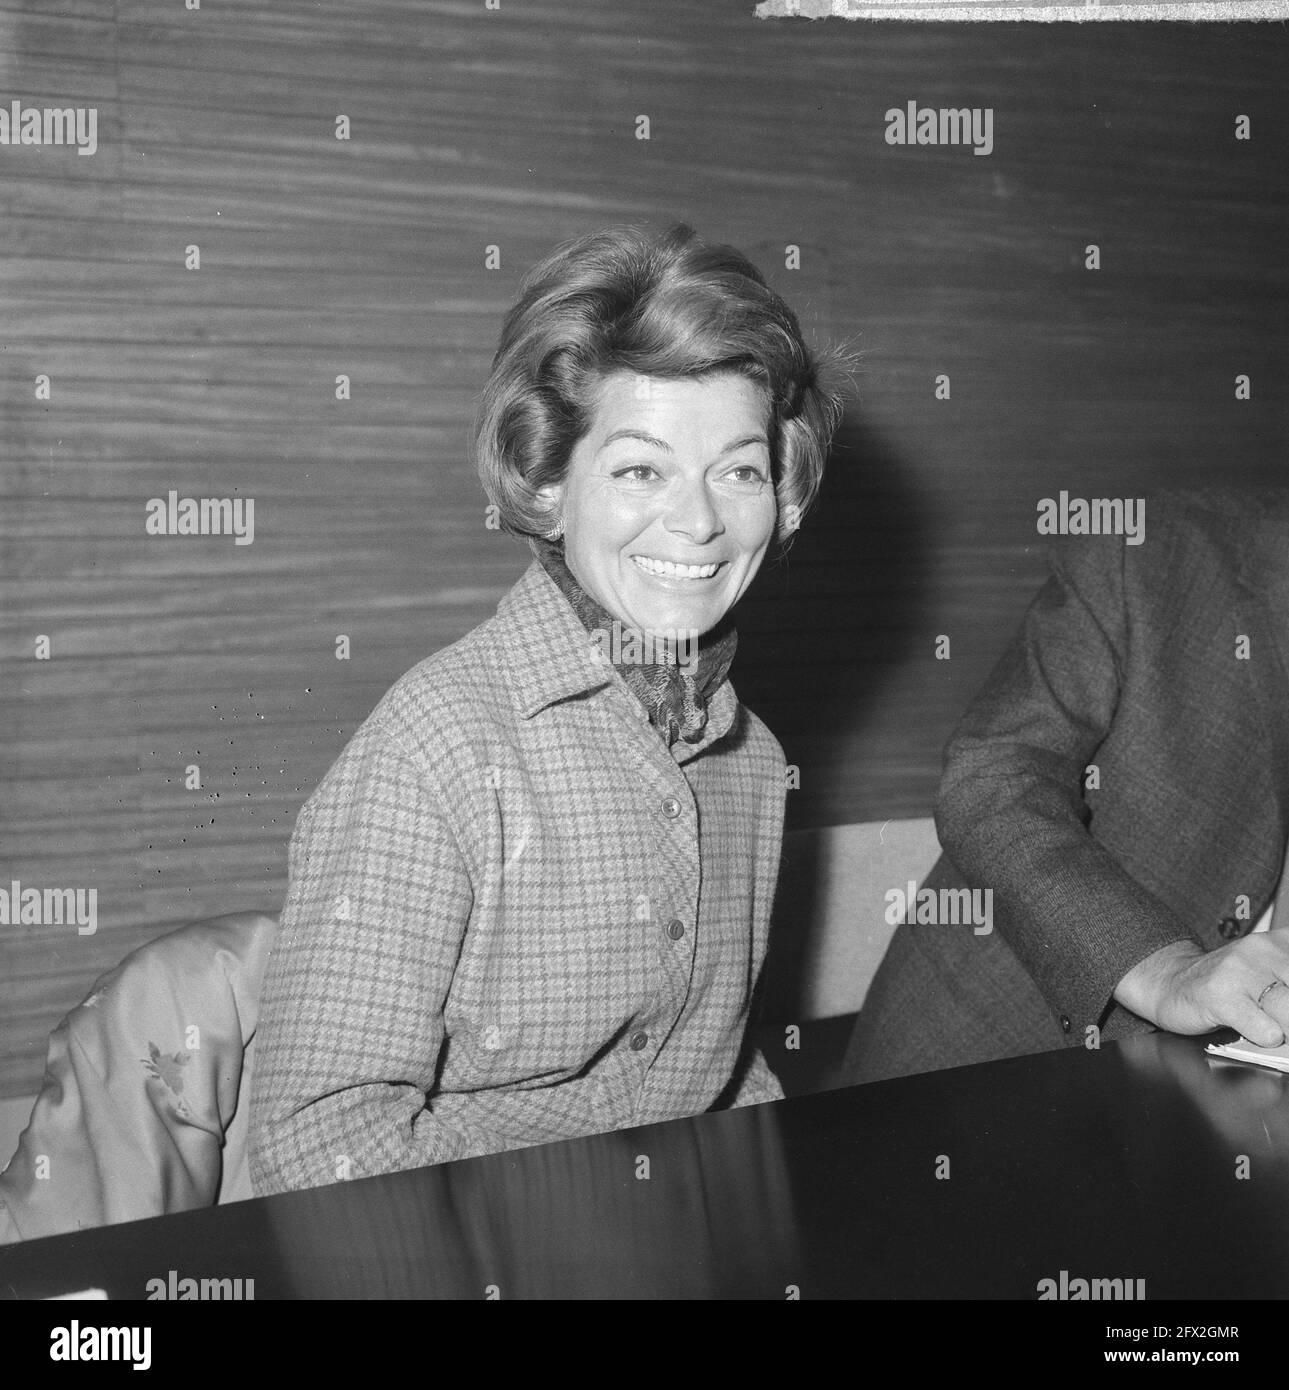 Lys Assia (singer) during press conference at Schiphol (head), December 4, 1964, press conferences, singers, The Netherlands, 20th century press agency photo, news to remember, documentary, historic photography 1945-1990, visual stories, human history of the Twentieth Century, capturing moments in time Stock Photo